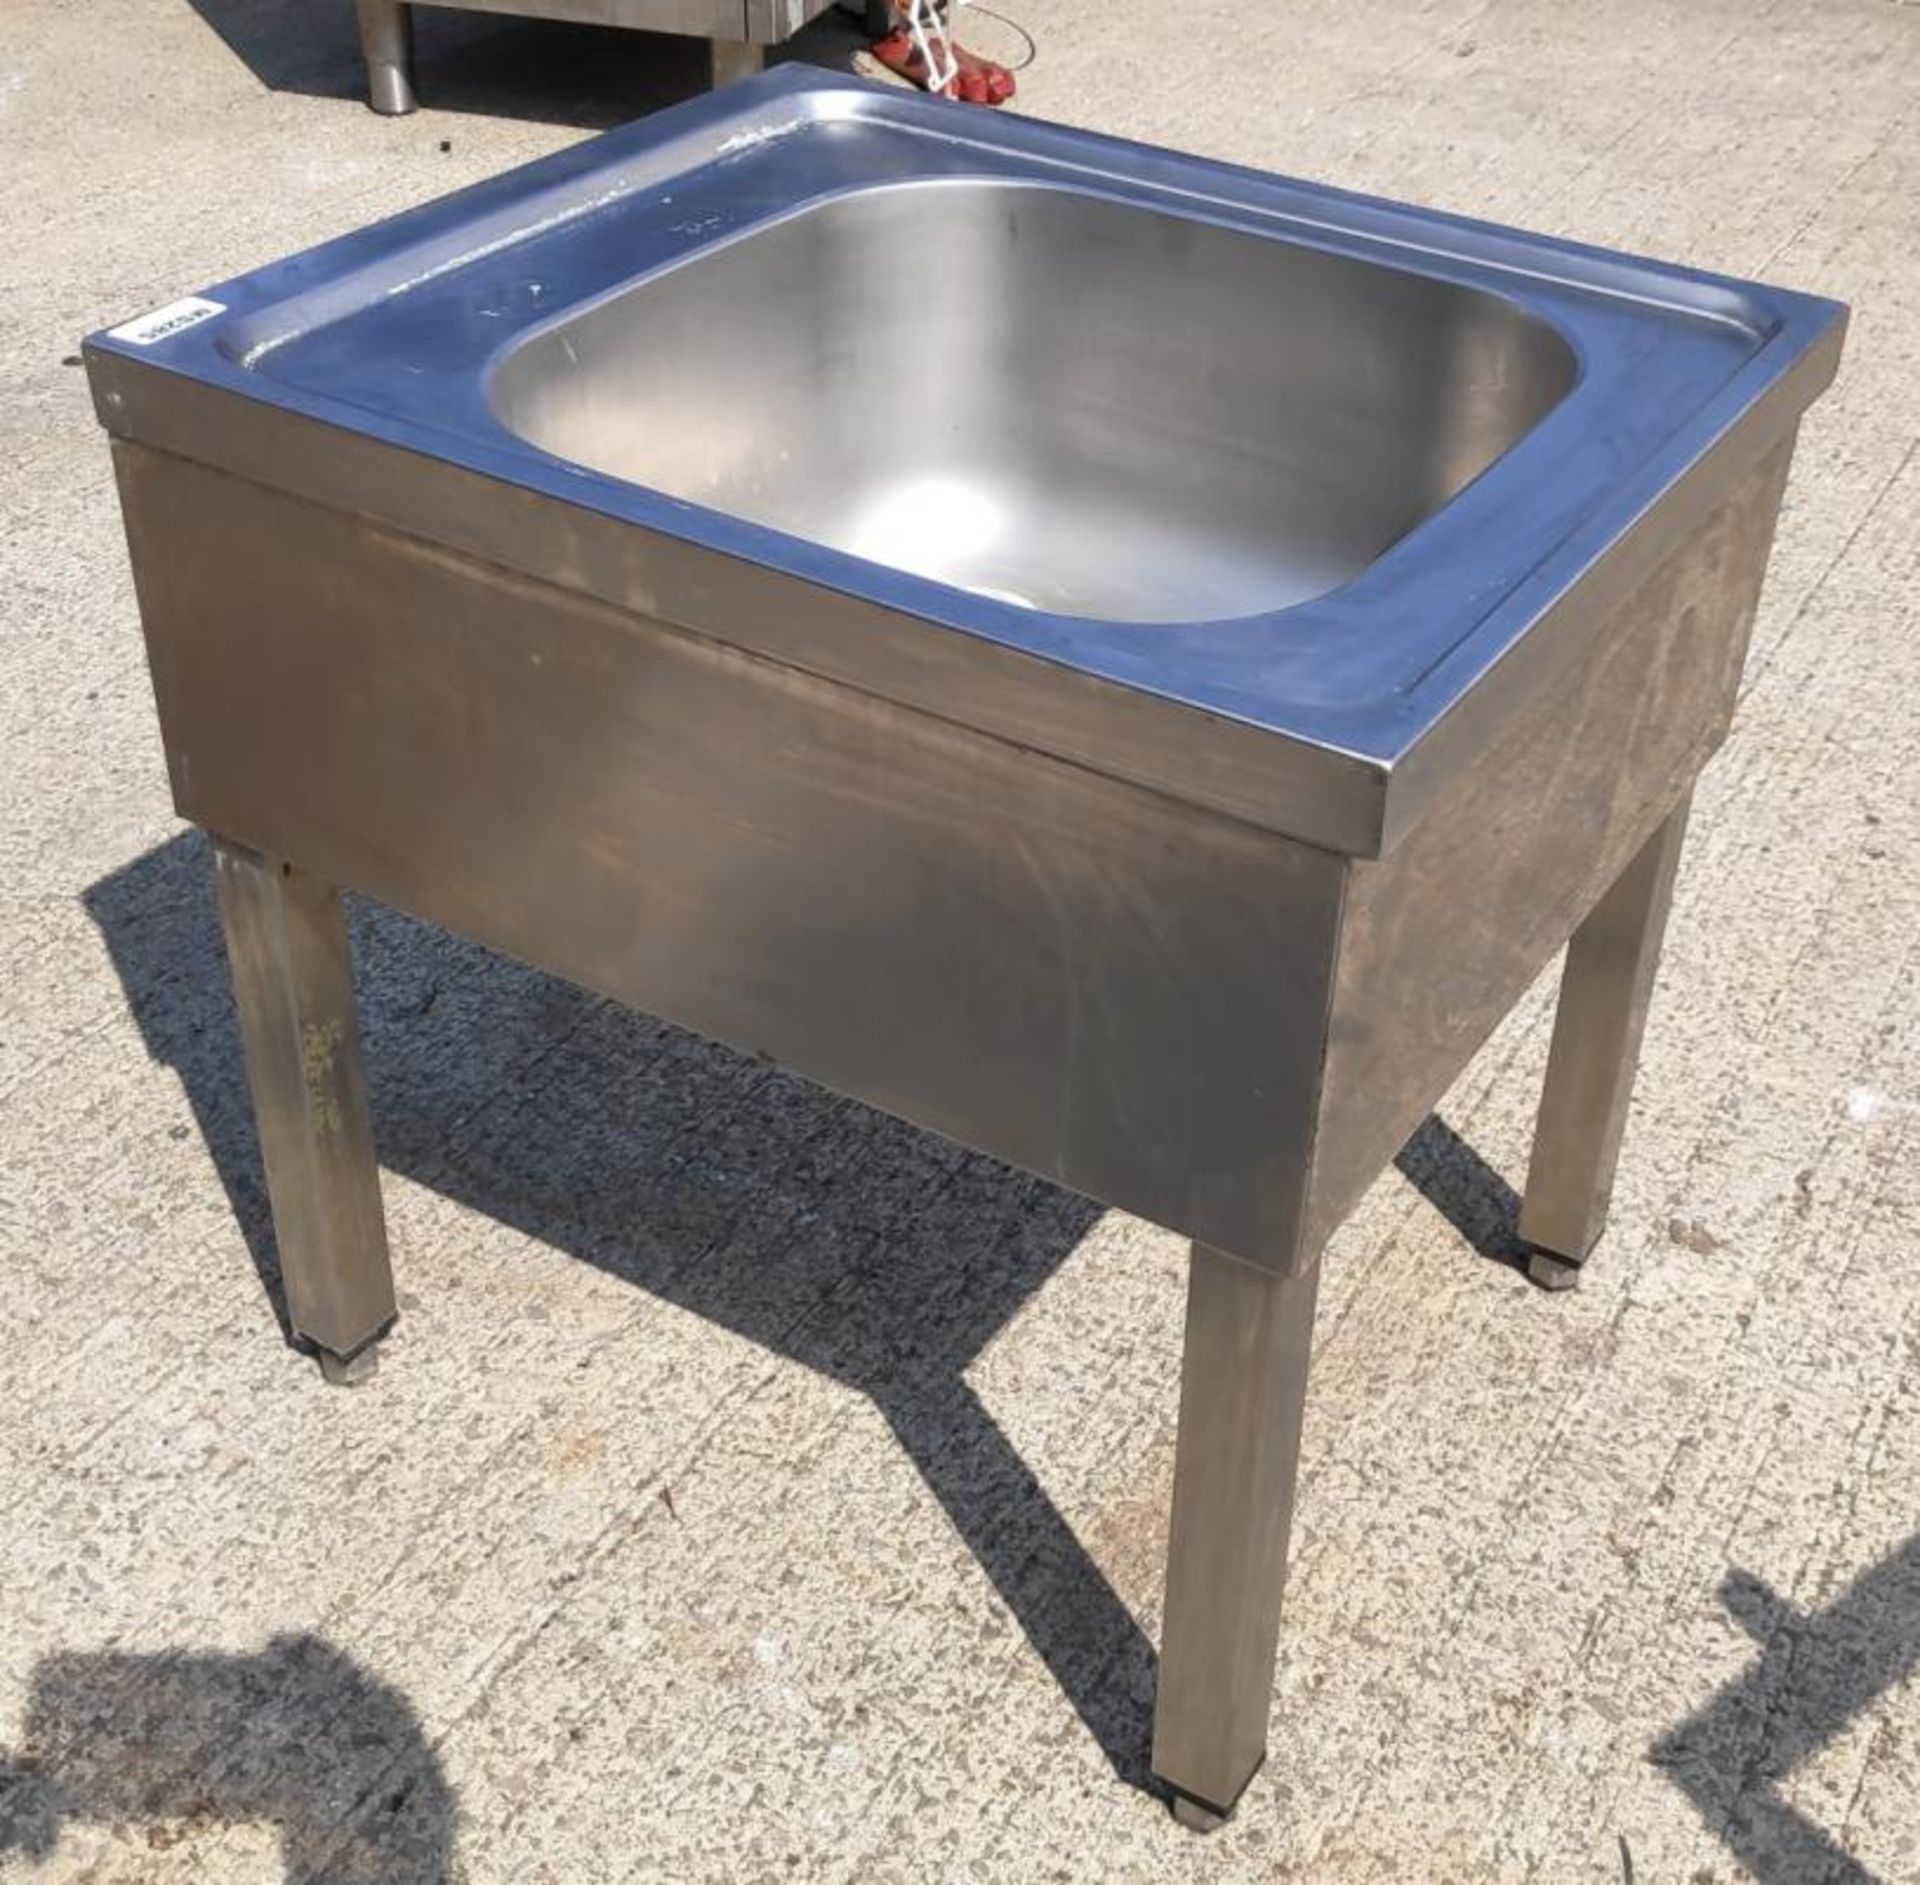 1 x Low Stainless Steel Commercial Kitchen Sink Unit - Dimensions: 50W x 60D x 60H cm - Very Recentl - Image 2 of 6